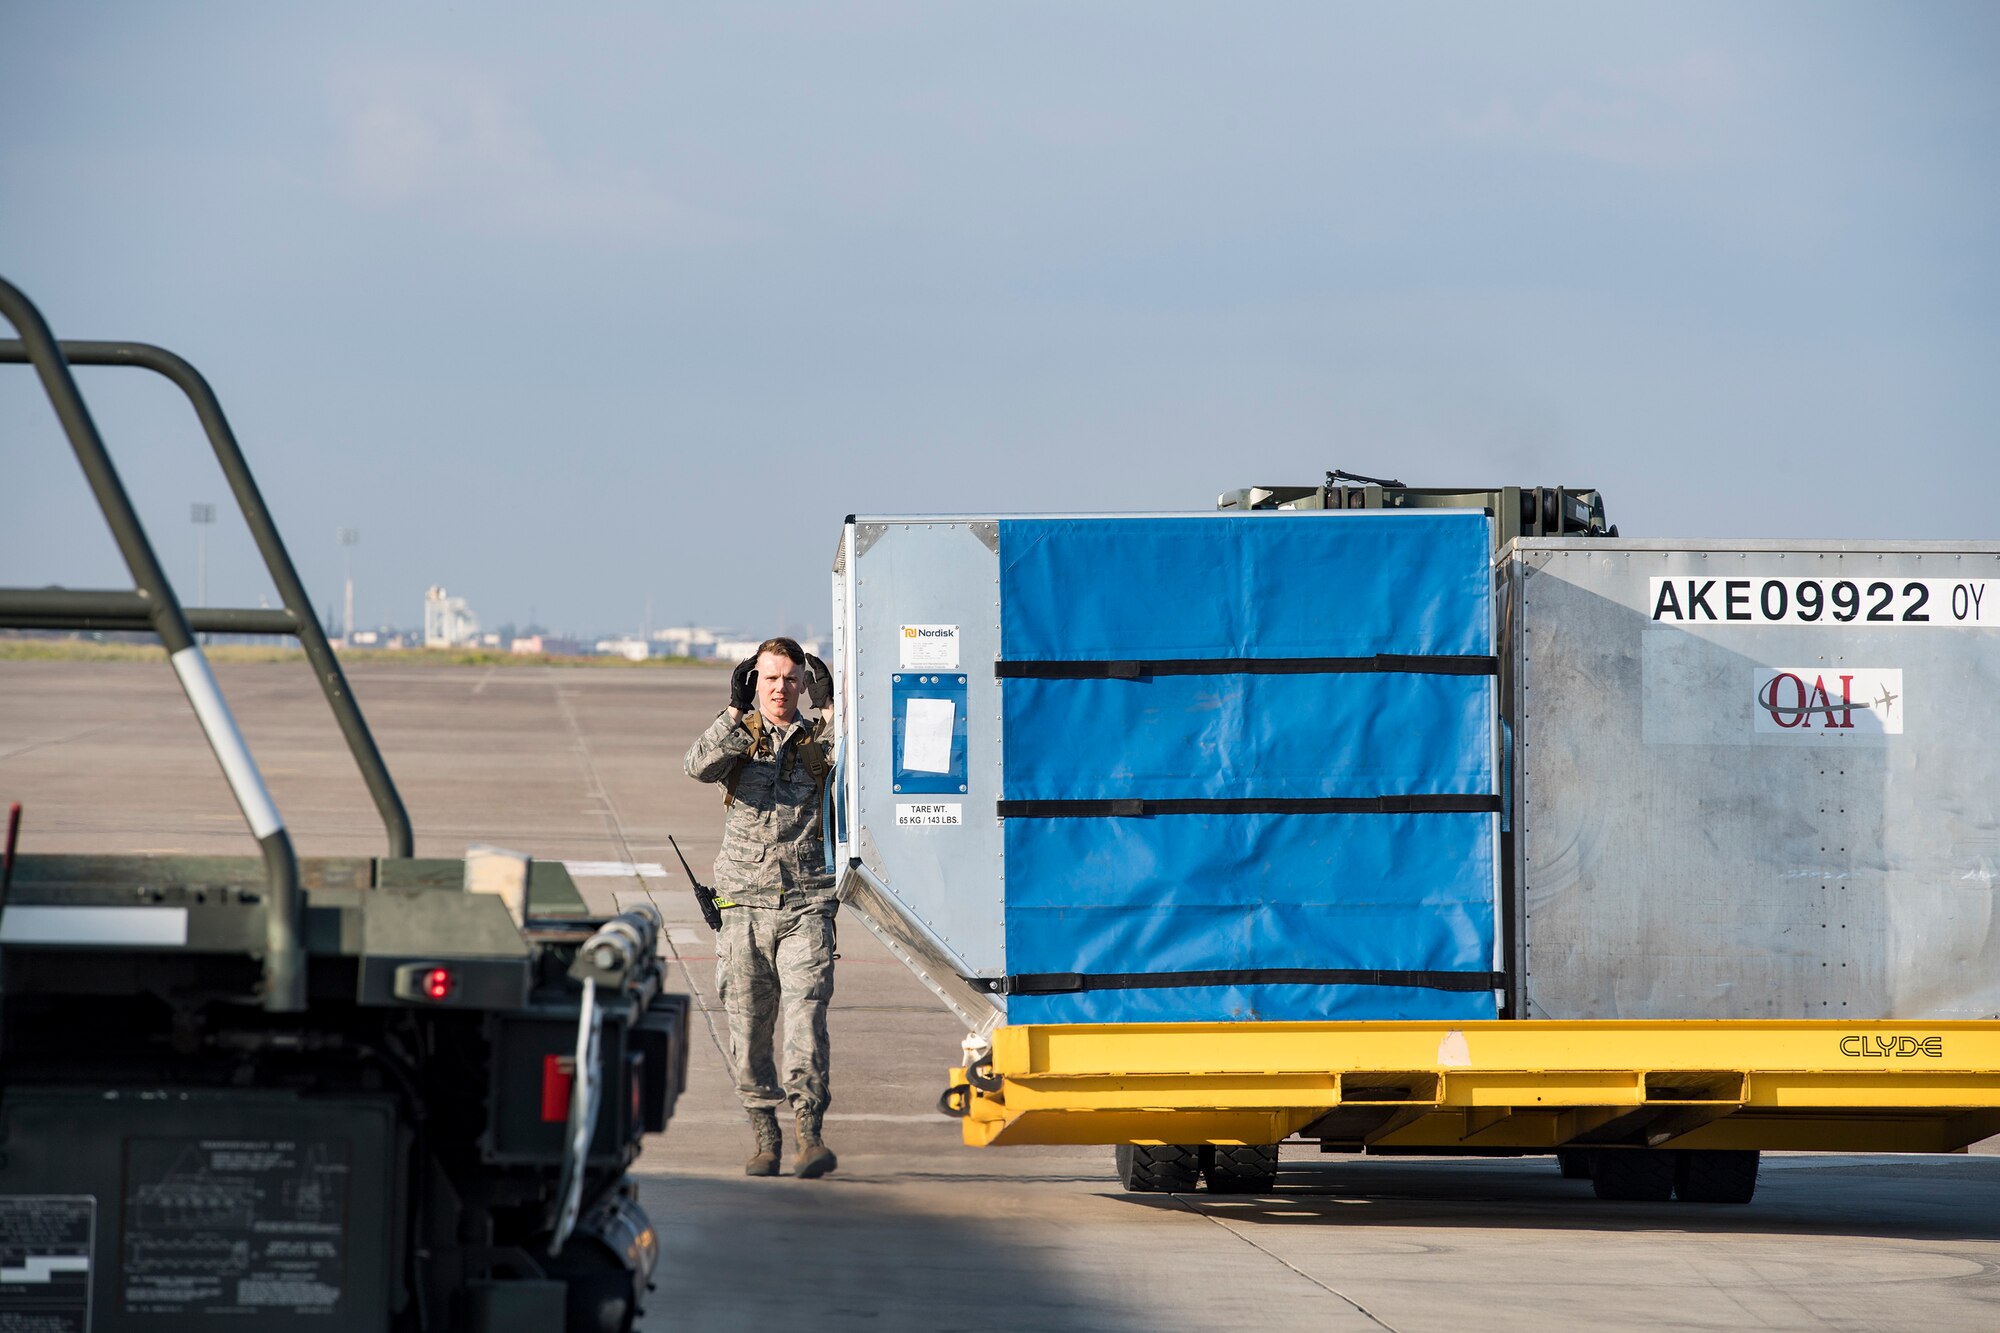 Senior Airman Waite Rowland, 728th Air Mobility Squadron aircraft service journeyman, marshals a forklift carrying luggage containers March 19, 2019, at Incirlik Air Base, Turkey. The 728th AMS consists of three flights: Aerial Port, Aircraft Maintenance and Combat Readiness and Resources. Together, they ensure safe and effective en route support for missions transiting Europe, Africa, and Southwest Asia and support five combatant commanders with aerial port operations, aircraft maintenance, and command and control 24/7/365. (U.S. Air Force photo by Staff Sgt. Ceaira Tinsley)